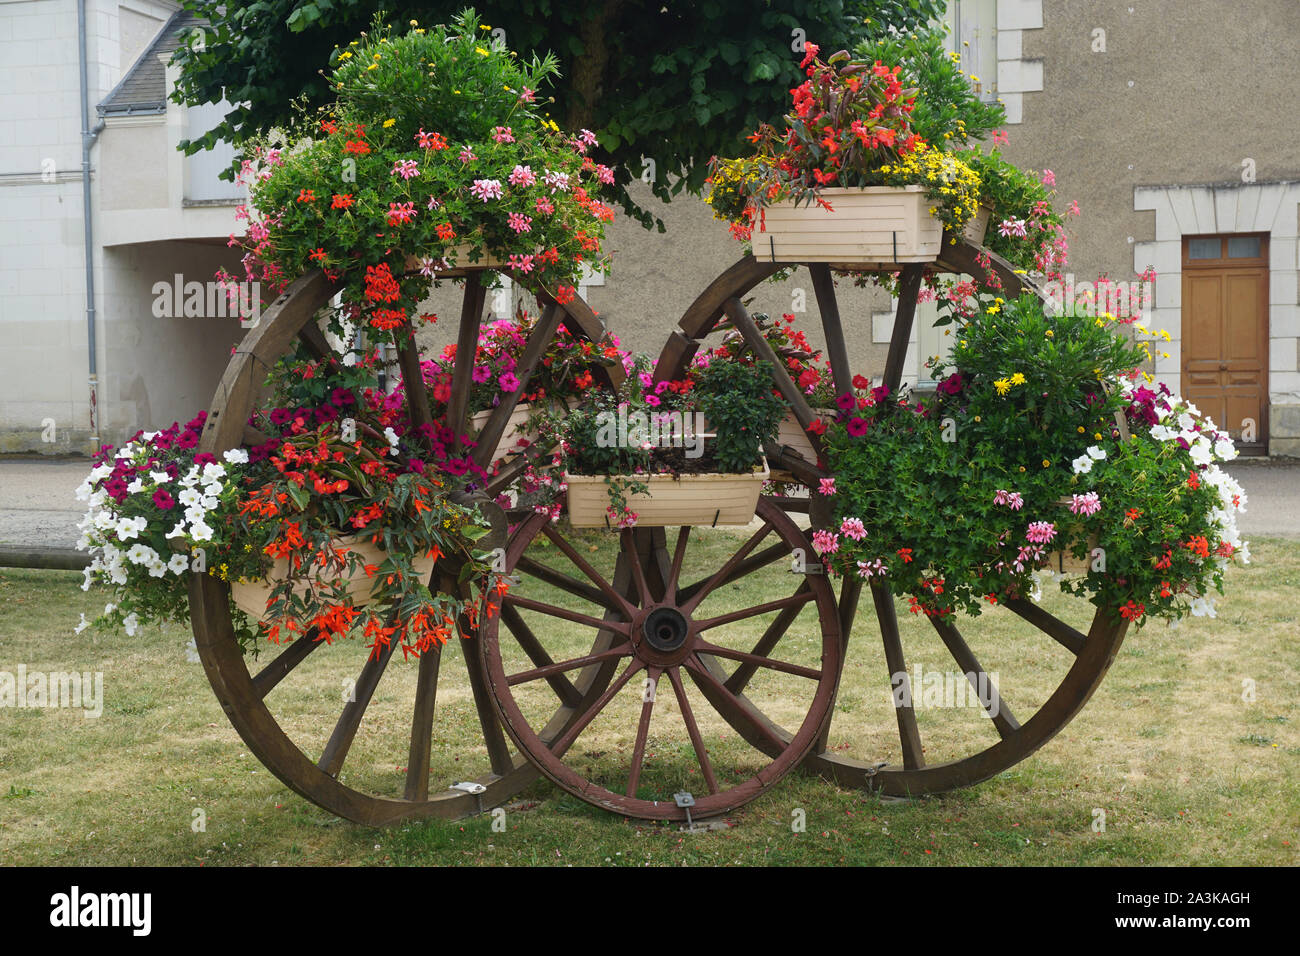 colorful flower pots hanging on wood carriage wheels as decoration in a small village in France Stock Photo